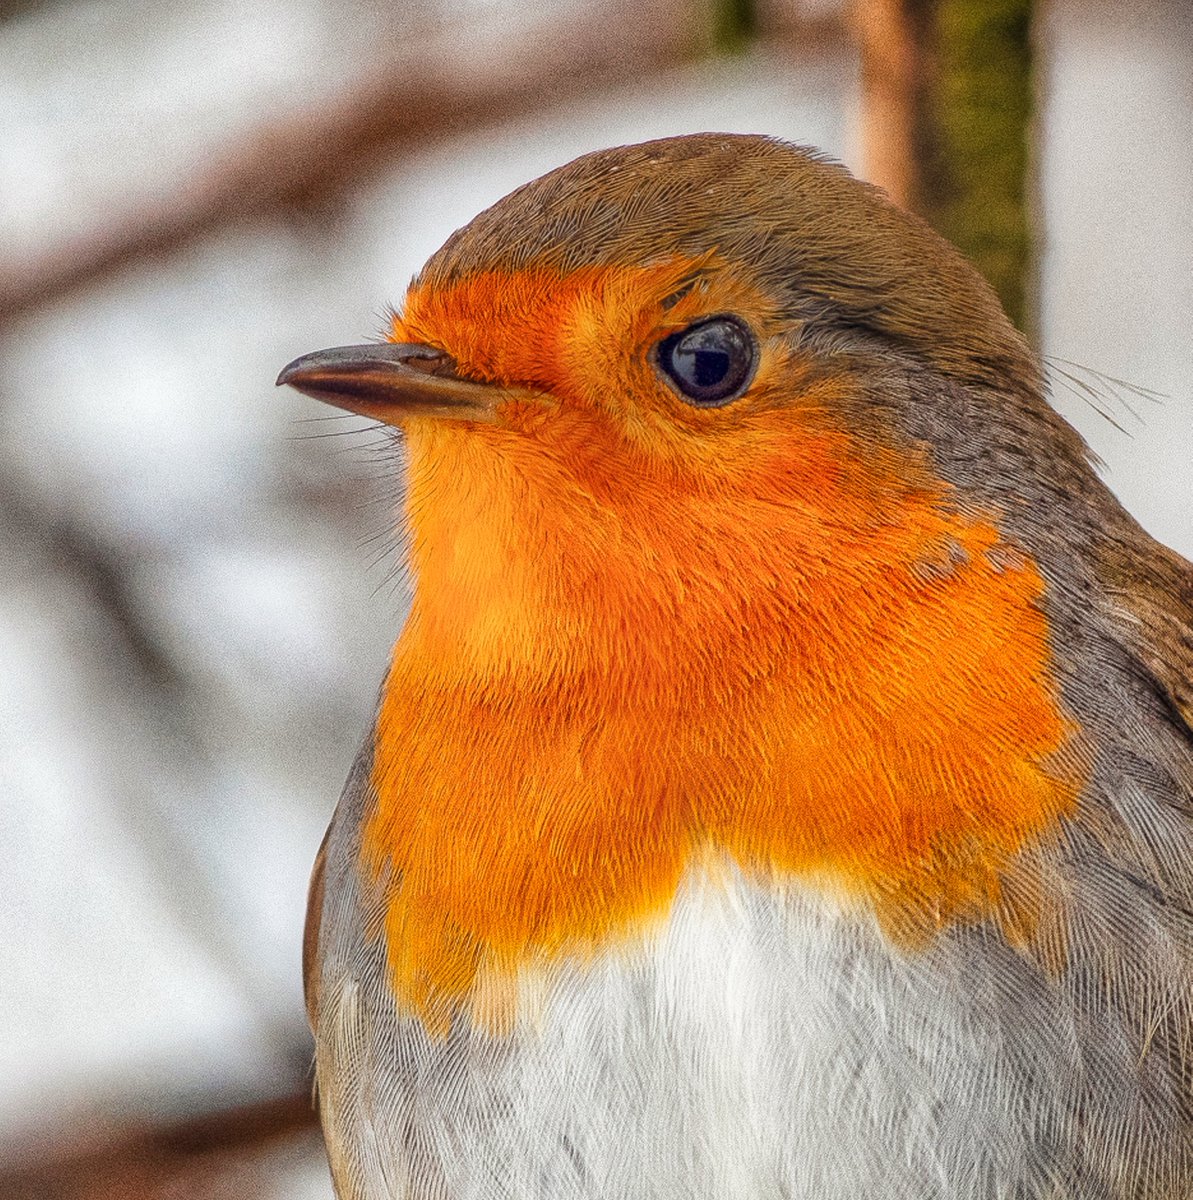 ‘Though she be but little she is fierce’ - Shakespeare It's National Robin Day, and we're celebrating this feisty, festive bird.